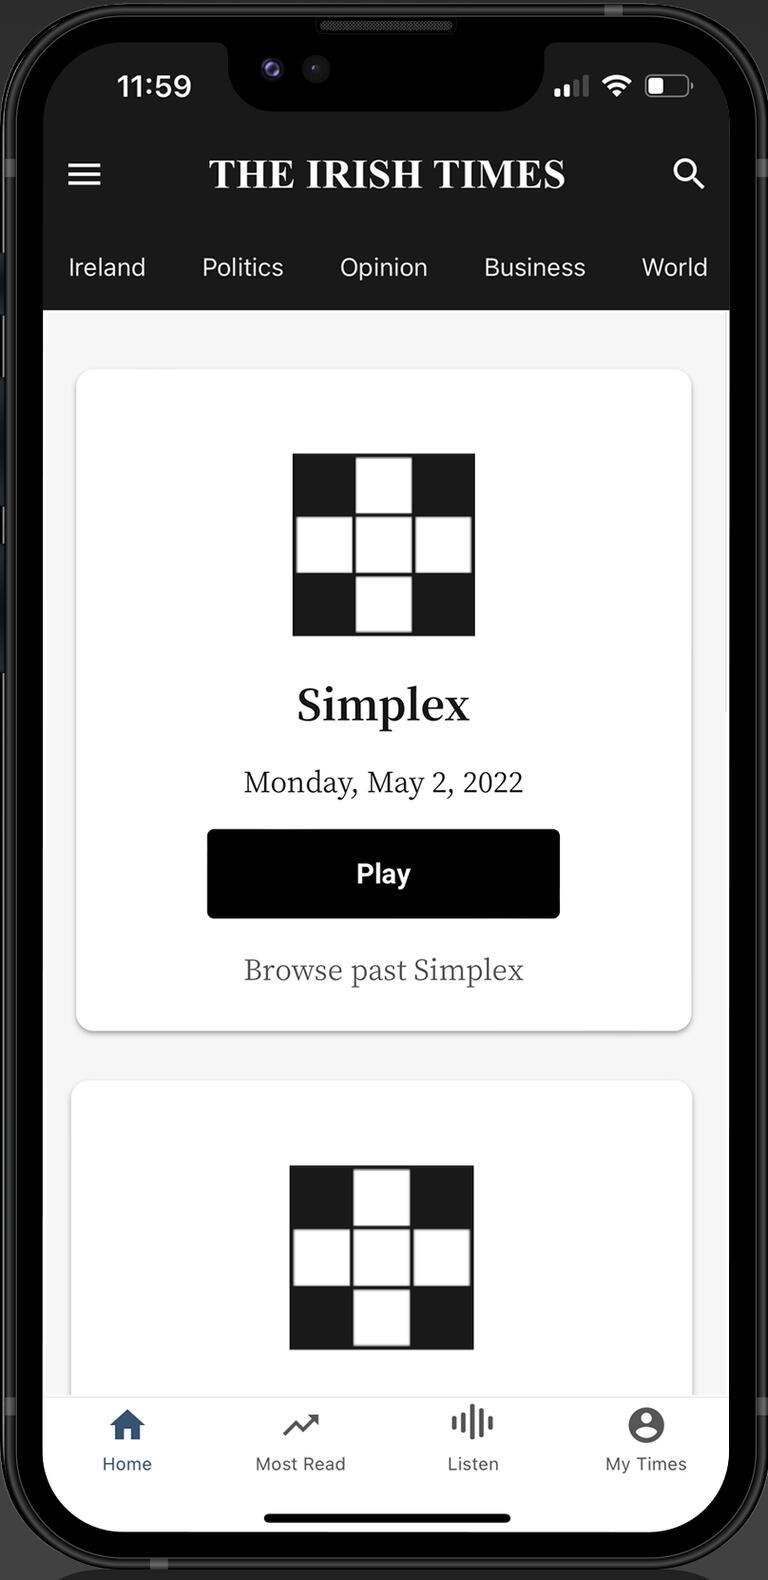 Crosswords are available for subscribers to play on the website and app